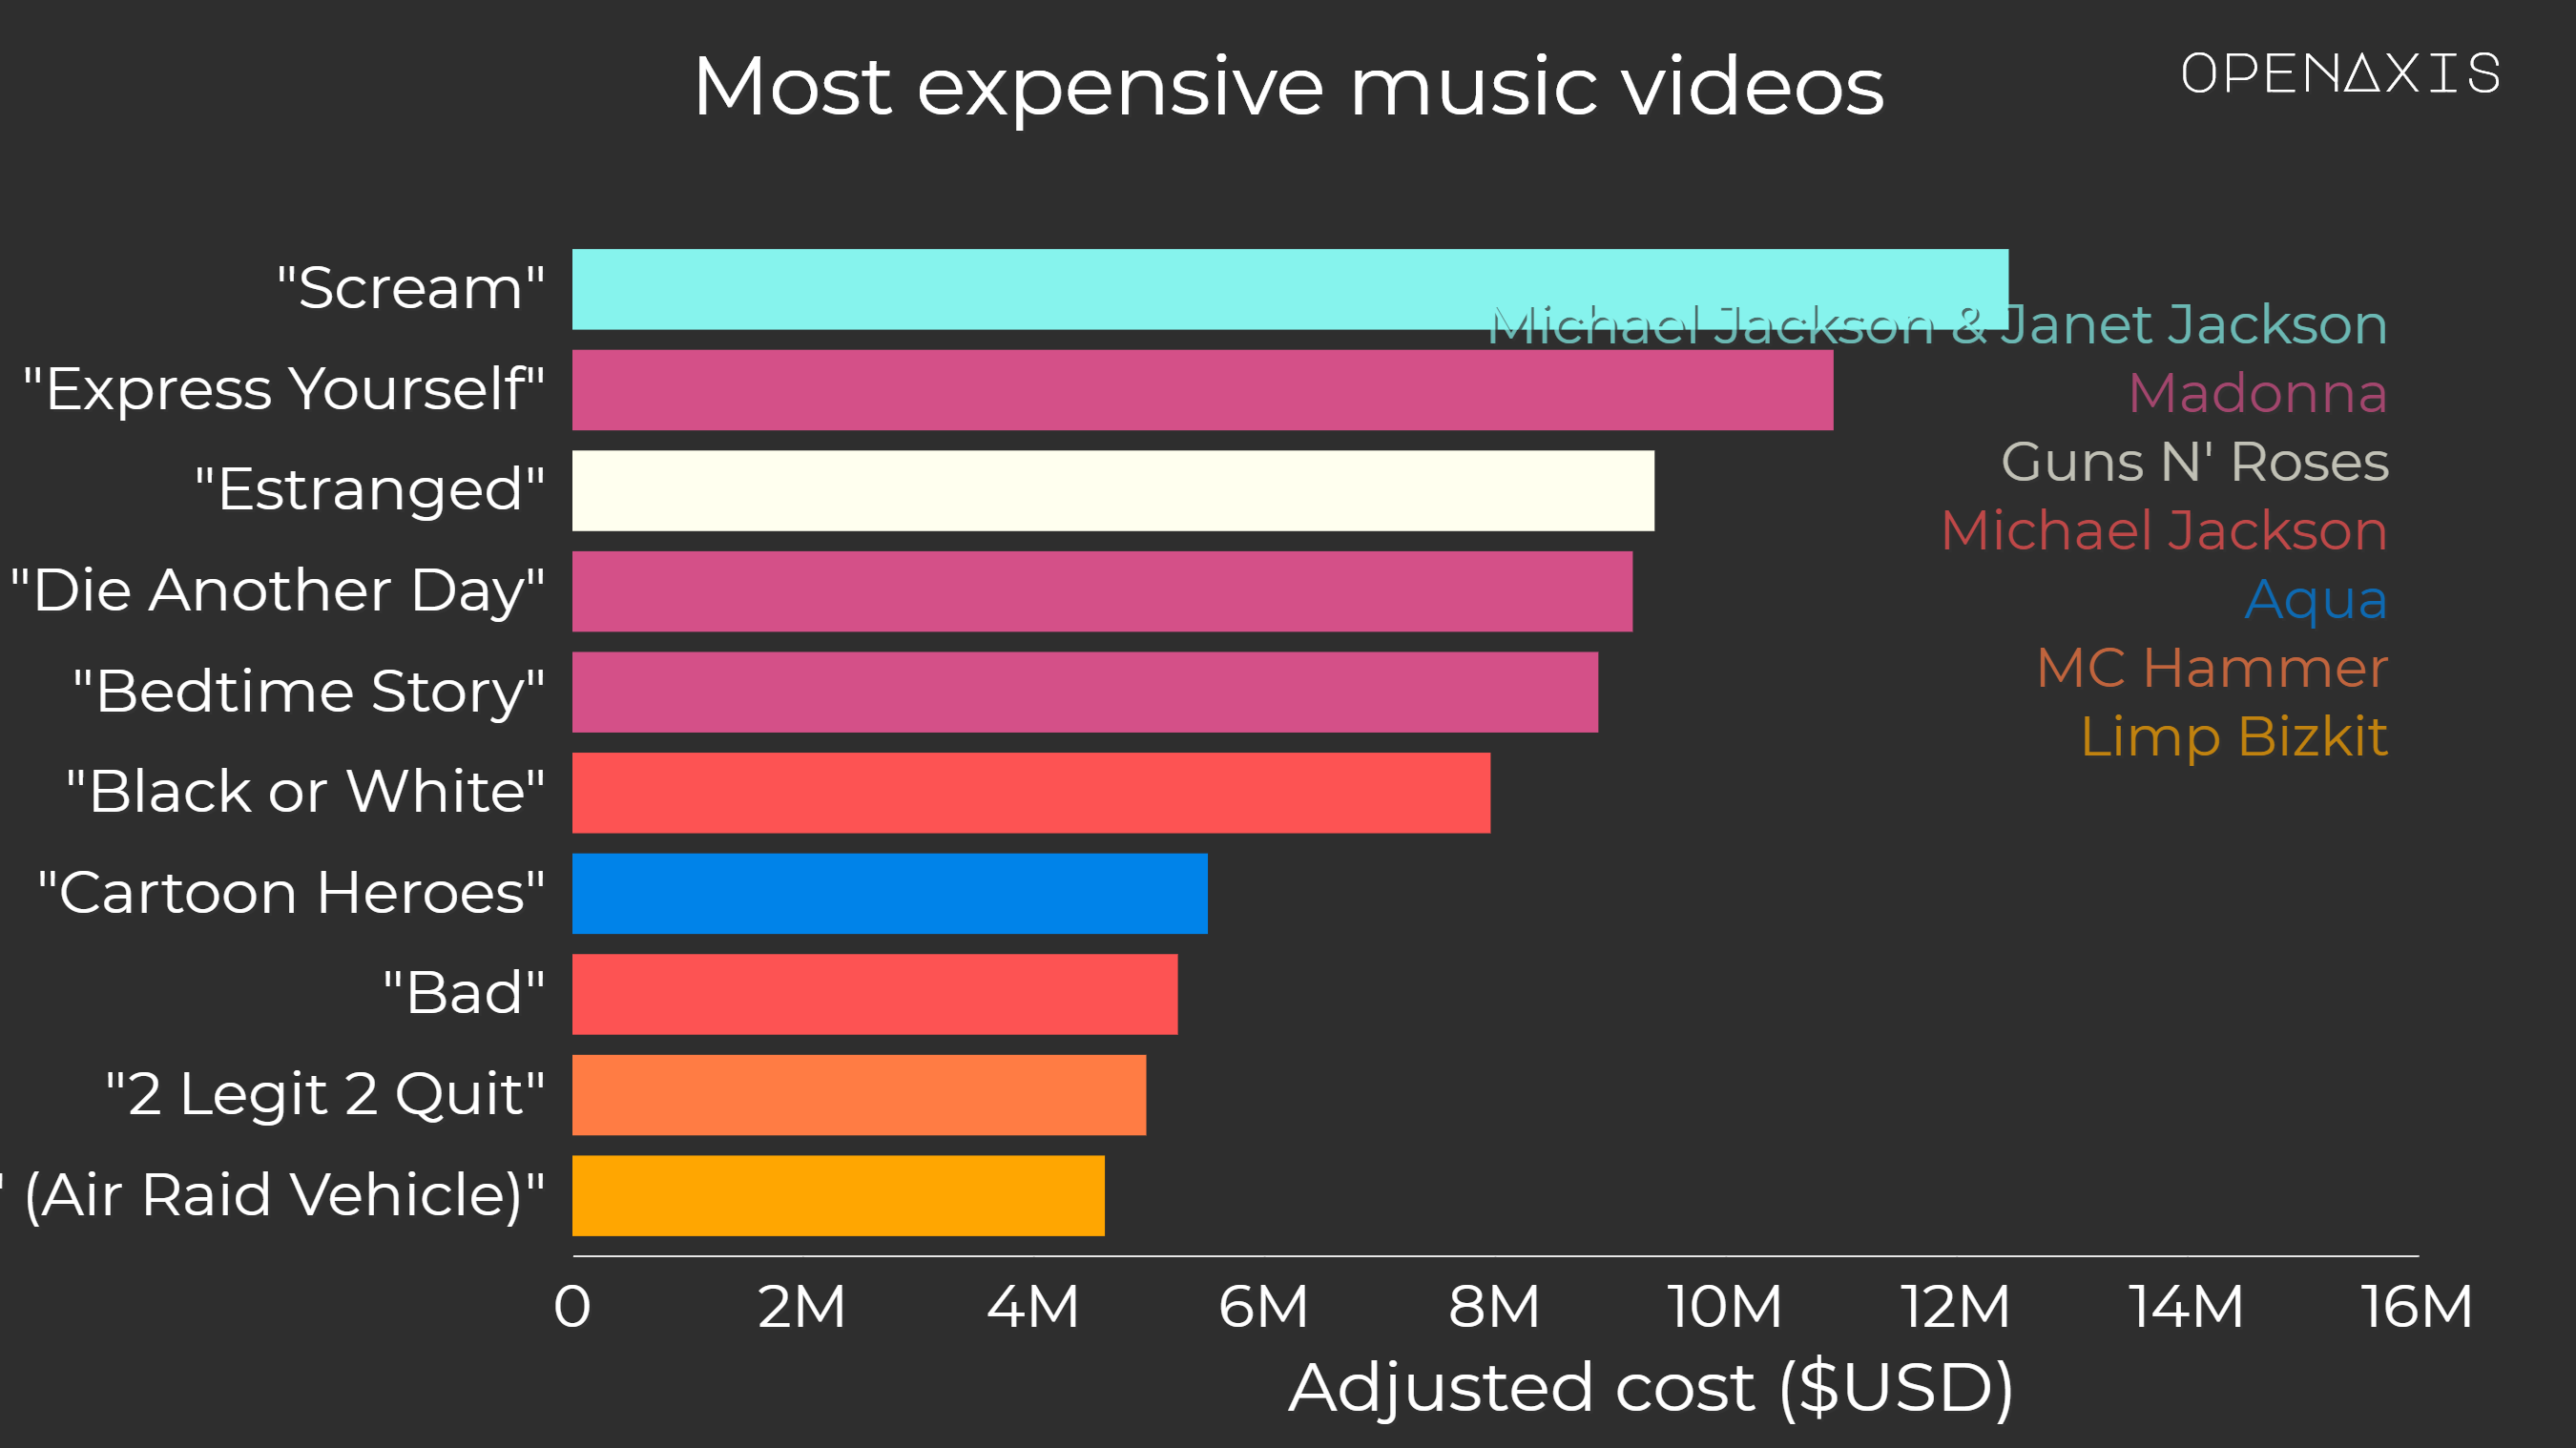 <p>This chart shows the Top 10 most expensive music videos ever made.</p><p><br /></p><p>David Bowie's video for the 1981 single "Ashes to Ashes" was the first music video to exceed $500,000. </p><p><br /></p><p>Janet Jackson leads with six videos on the list, while Michael Jackson, Britney Spears and Ayumi Hamasaki have five each. Madonna has made three appearances in the top five, and four total, making her the artist with the most expensive videos of all time combined. TLC, Mariah Carey, Kanye West, Busta Rhymes, Guns N' Roses, Mylène Farmer and MC Hammer appear on the list twice.</p><p><br /></p><p><span data-index="0" data-denotation-char data-id="0" data-value="&lt;a href=&quot;/search?q=%23music&quot; target=_self&gt;#music" data-link="/search?q=%23music">﻿<span contenteditable="false"><span></span><a href="/search?q=%23music" target="_self">#music</a></span>﻿</span> <span data-index="0" data-denotation-char data-id="0" data-value="&lt;a href=&quot;/search?q=%23entertainment&quot; target=_self&gt;#entertainment" data-link="/search?q=%23entertainment">﻿<span contenteditable="false"><span></span><a href="/search?q=%23entertainment" target="_self">#entertainment</a></span>﻿</span></p><p><br /></p><p>Source: <a href="/data/4050" target="_blank">Wikipedia</a></p><p><br /></p>